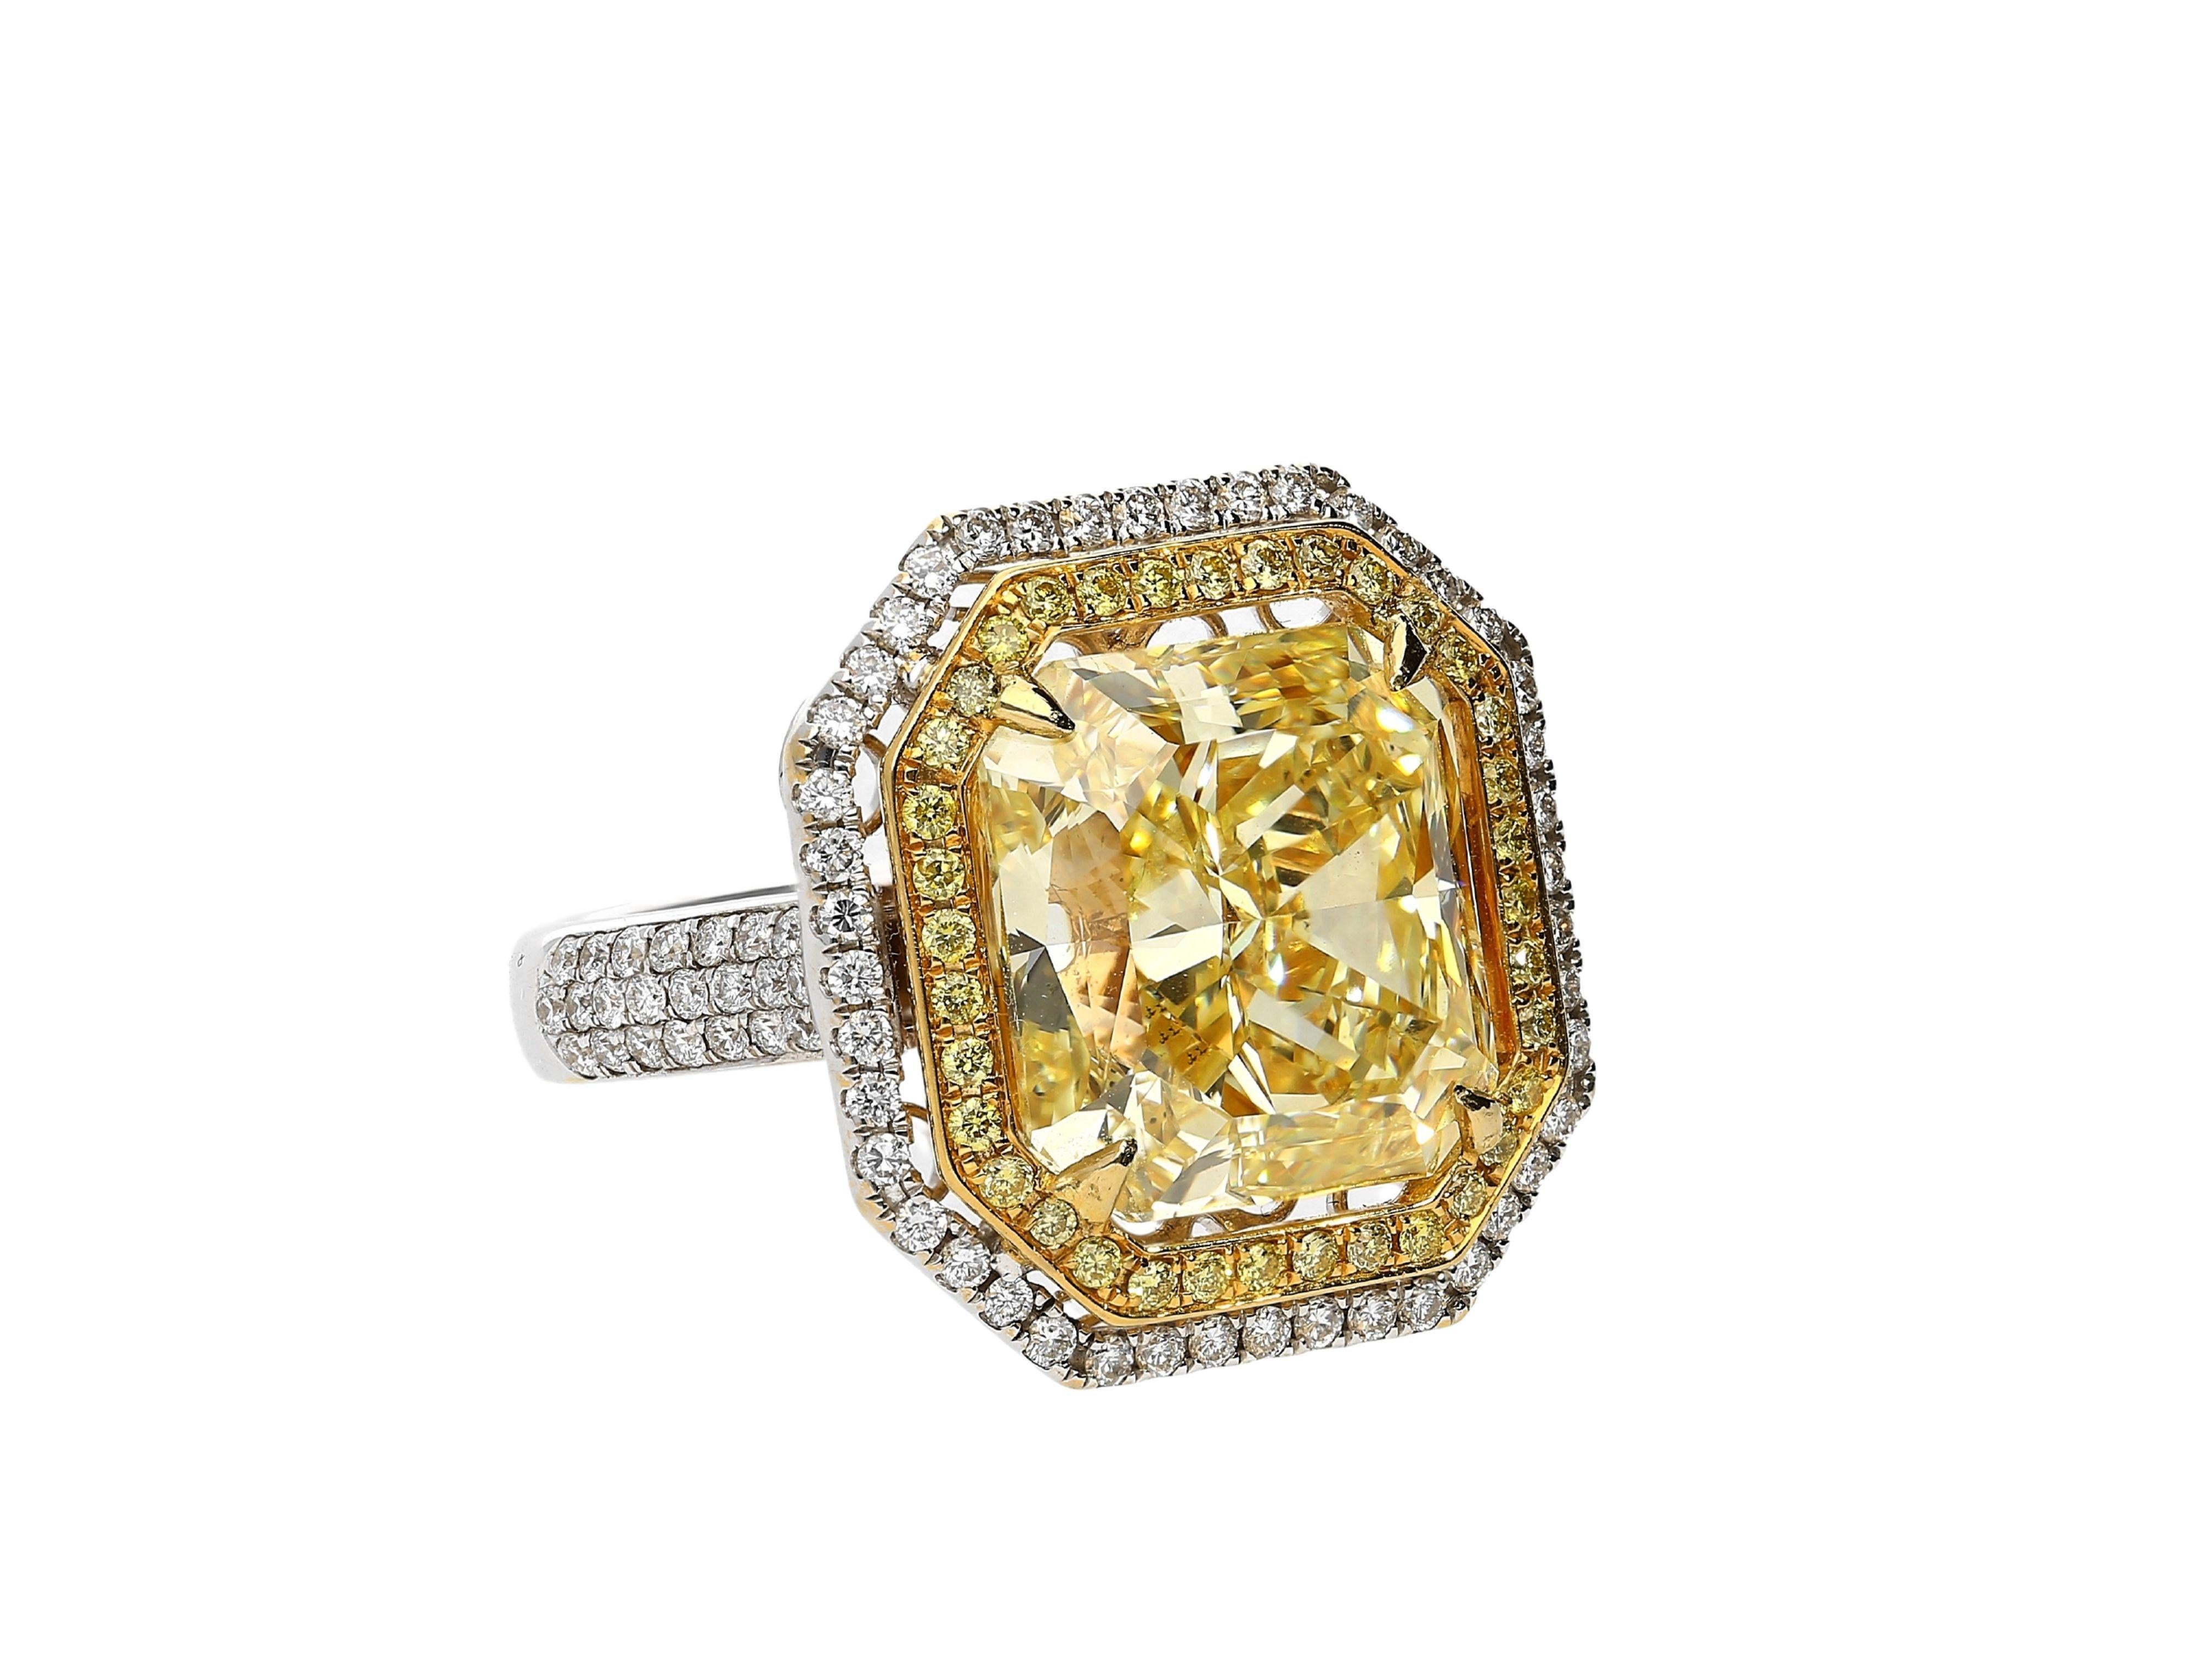 10.88 carat fancy yellow radiant cut diamond set with a 1 carat in white and yellow diamond halo. The ring setting is made in 18 karat white and yellow gold with an open back basket. This is done to ensure the culet is not covered and the stone's